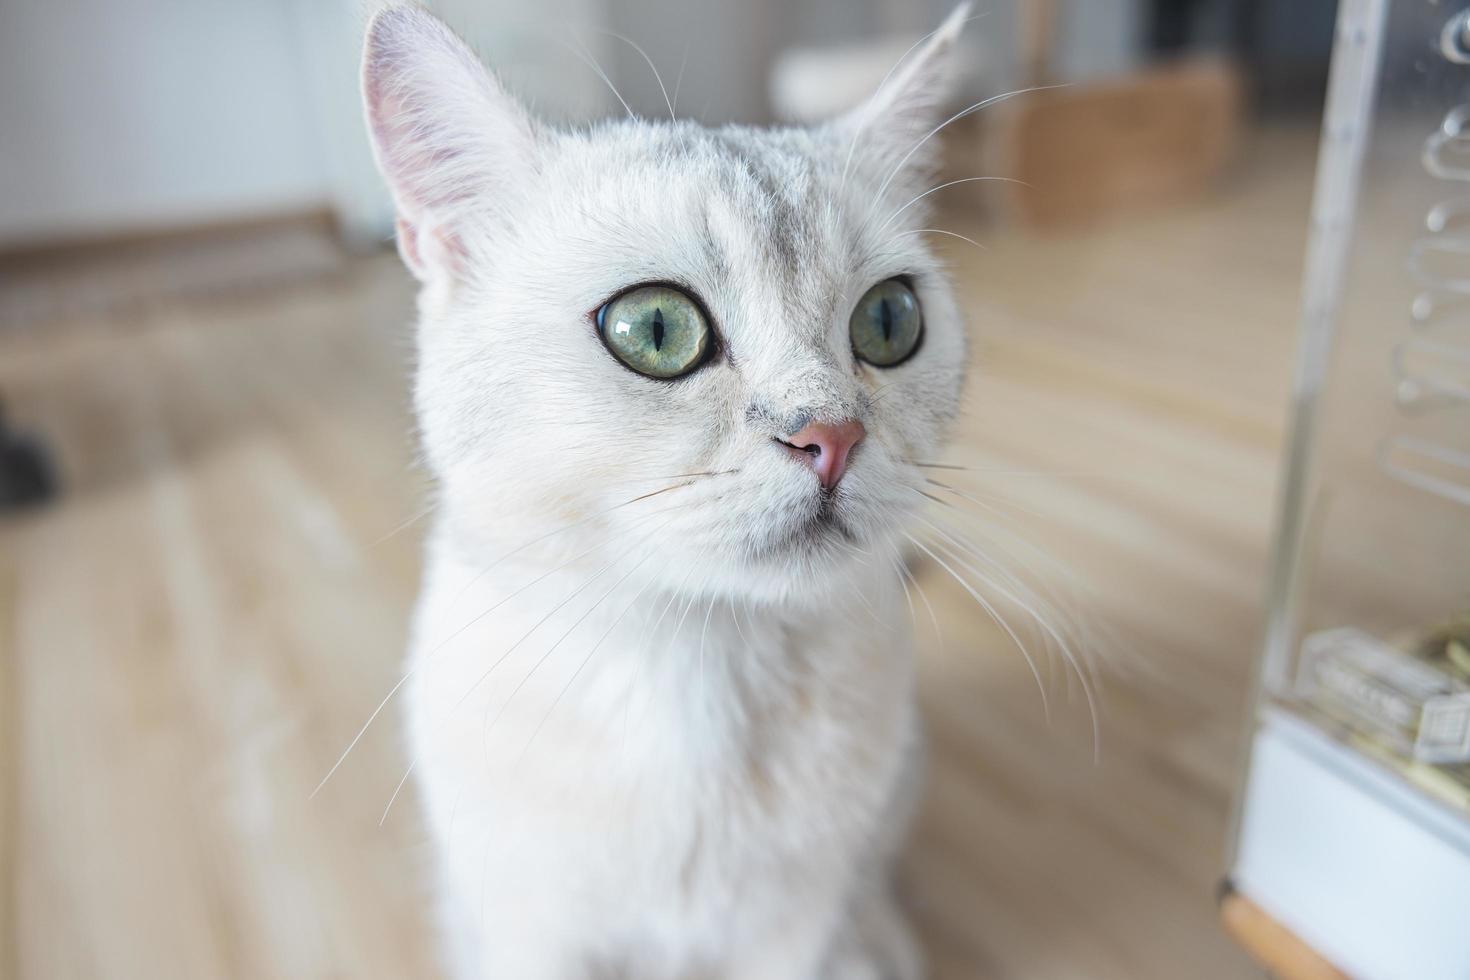 Cat cute with white short hair breed of British purebred. The Kitten pet is adorable sitting looking camera eyes yellow-green. Feline mammals are fluffy and playful. photo